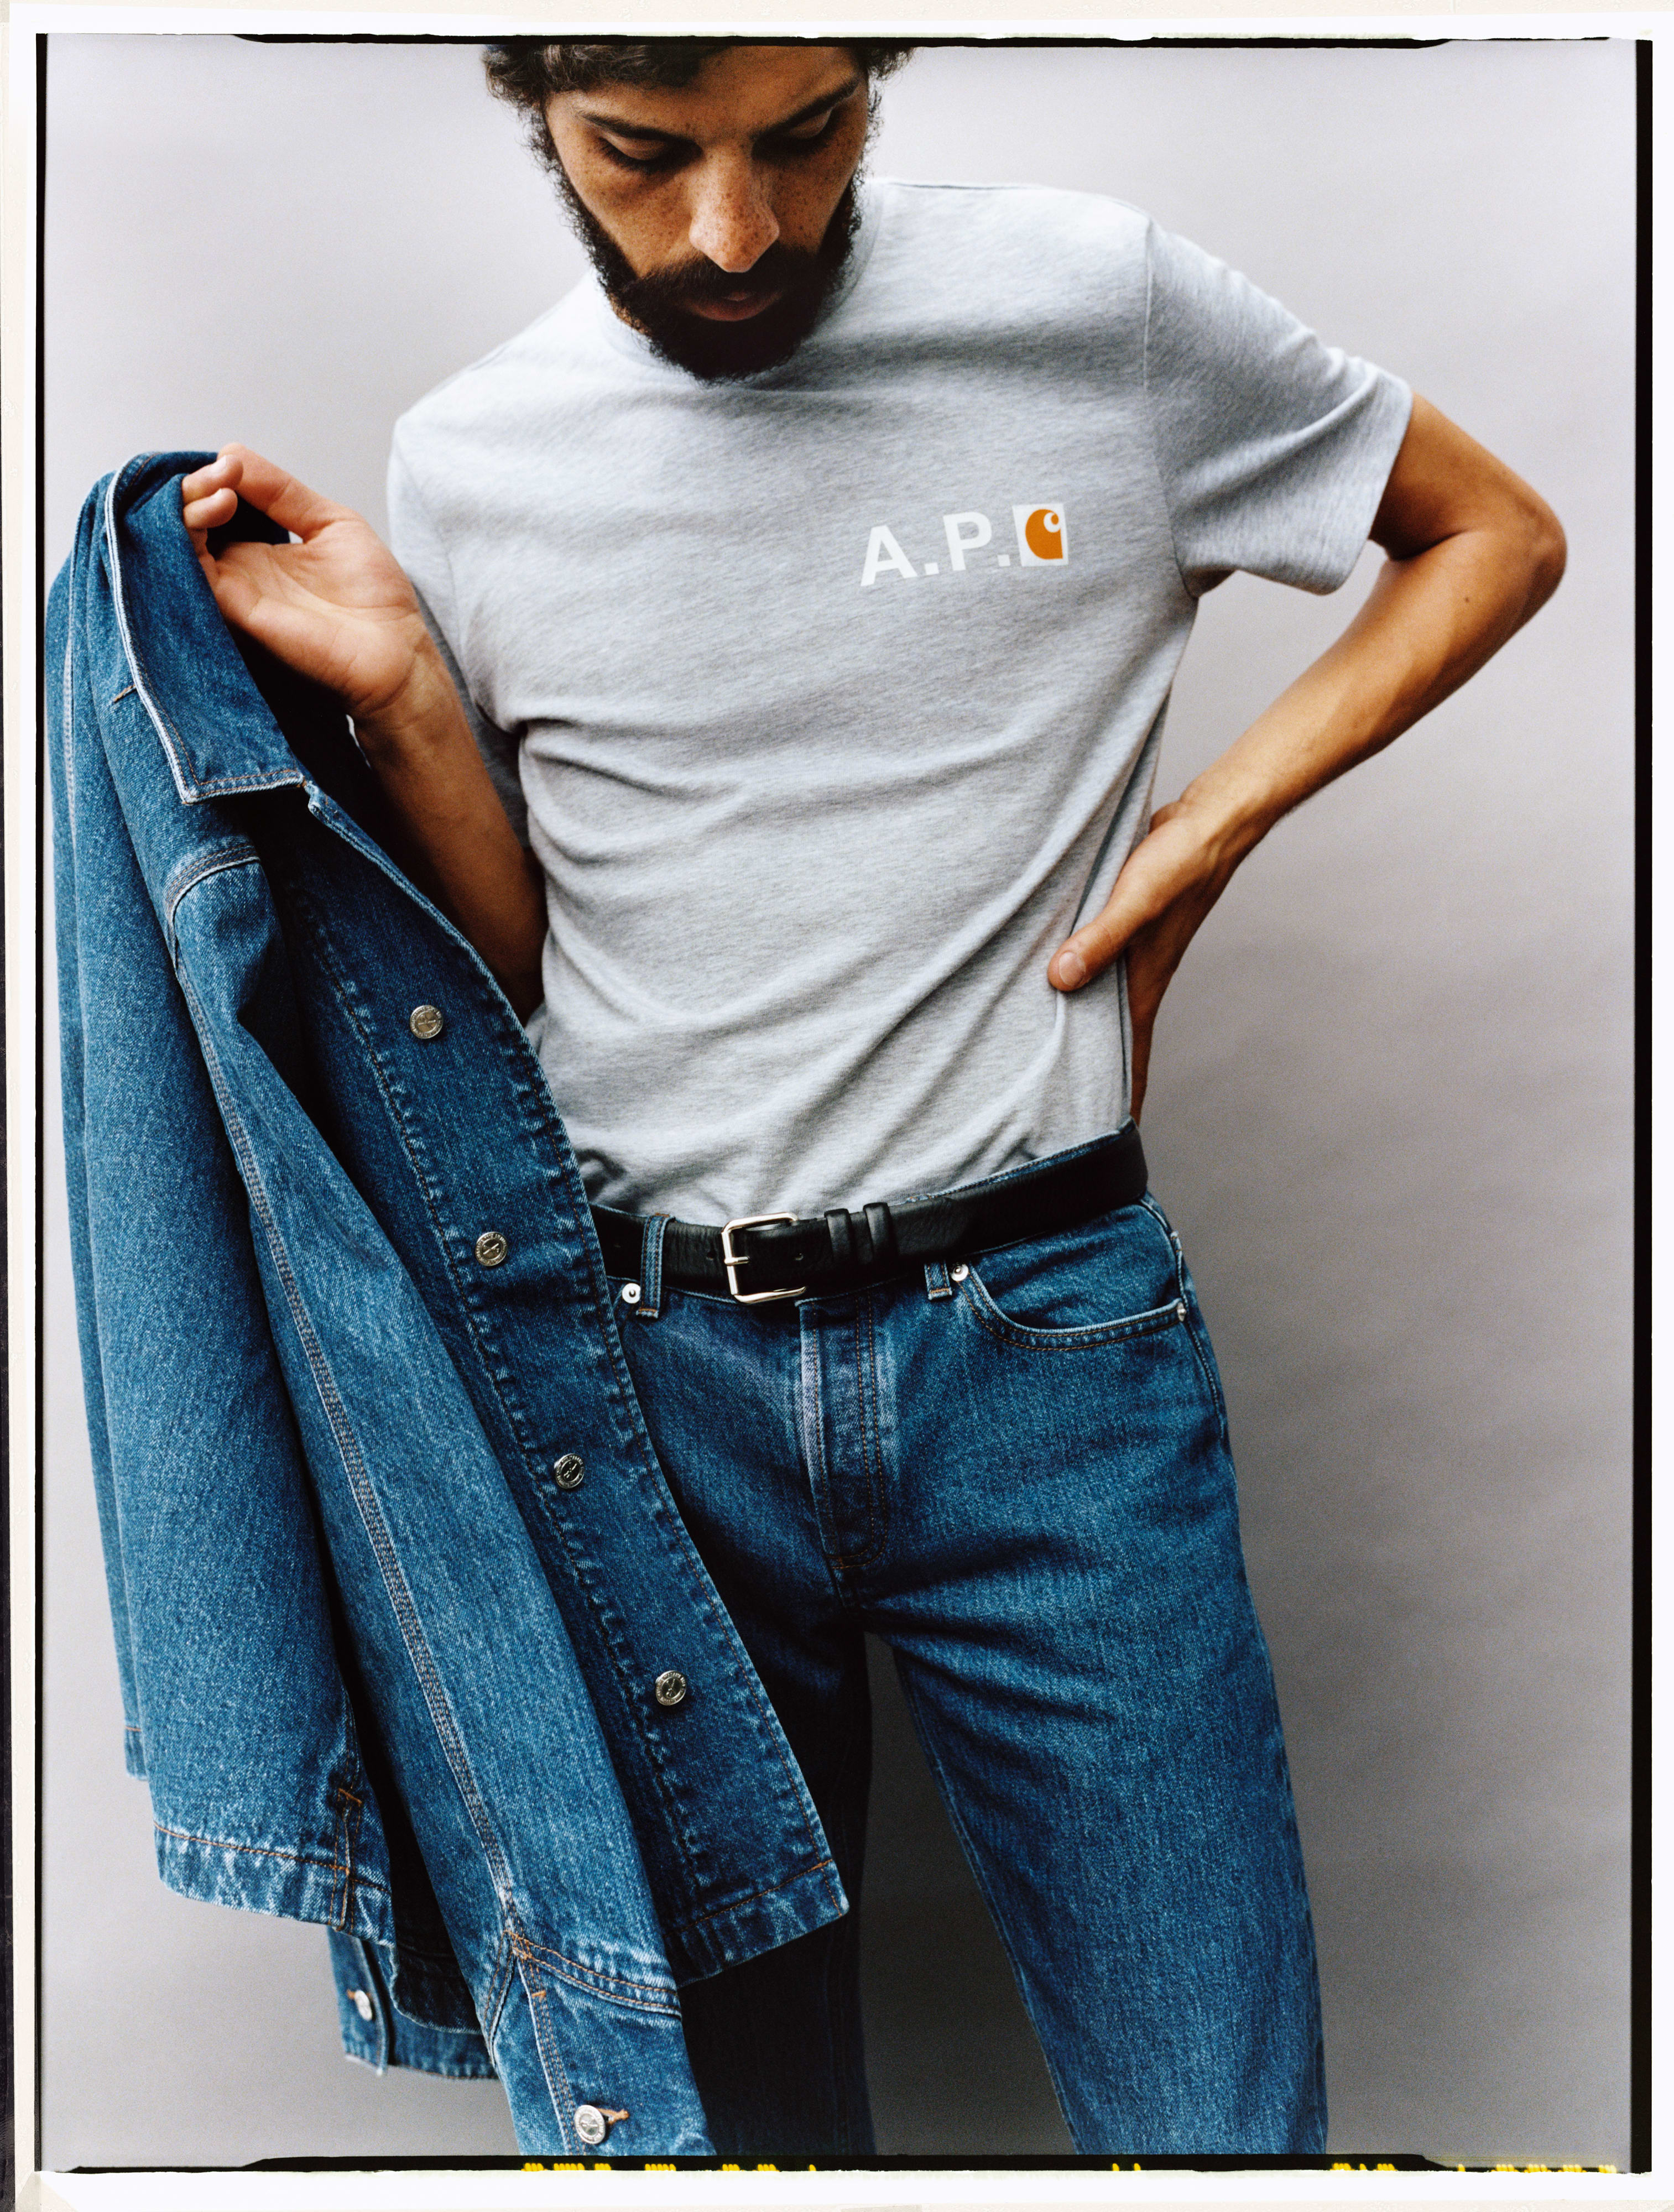 Complex Best Style Releases APC x Carhartt